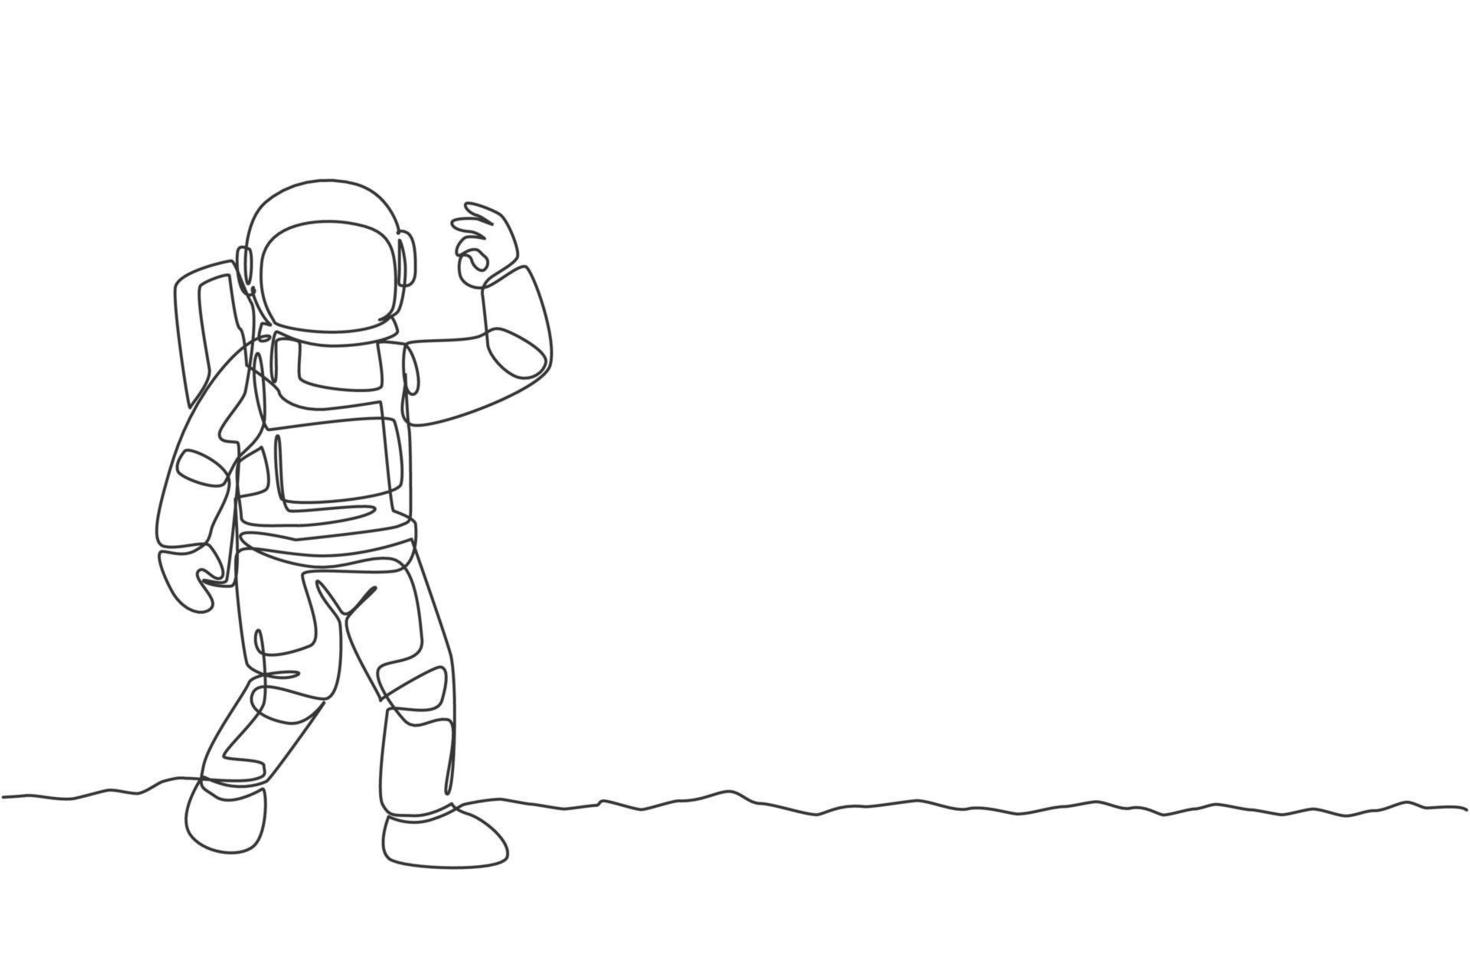 One single line drawing cosmonaut make okay gesture with his fingers in moon surface graphic vector illustration. Astronaut business office with outer space concept. Modern continuous line draw design